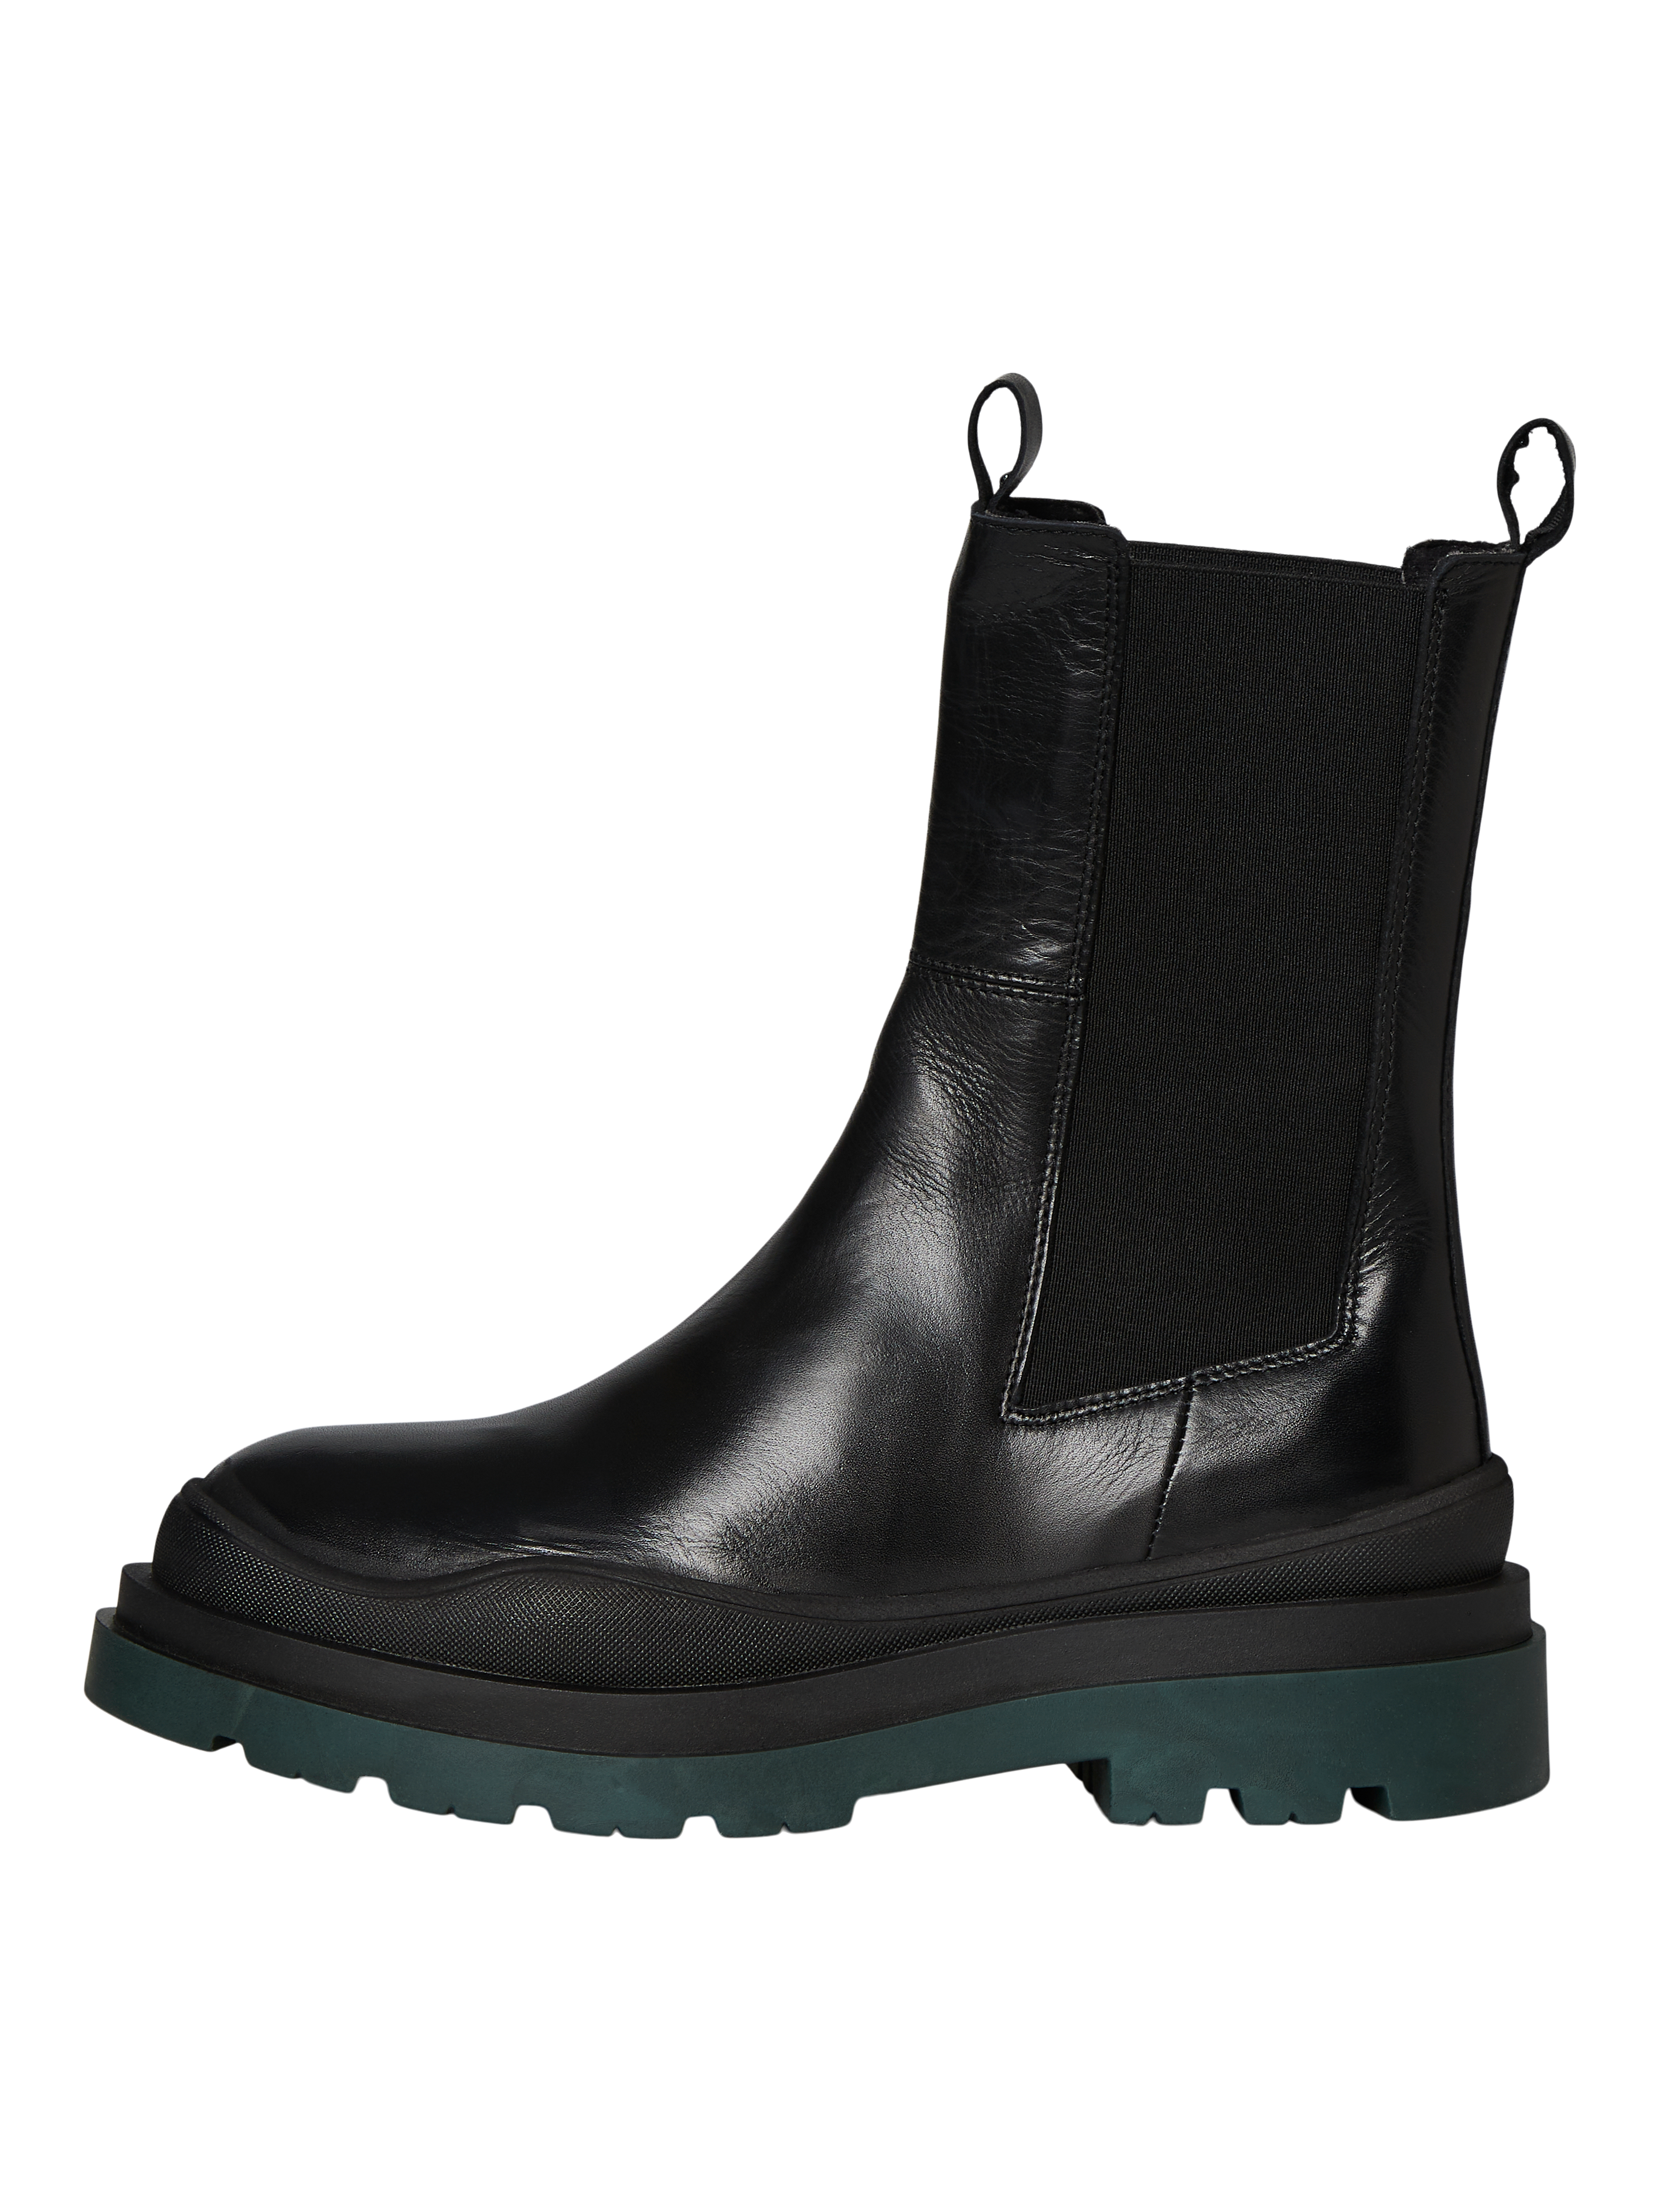 meddelelse fure Frivillig Round toe Boots with 50% discount! | Vero Moda®